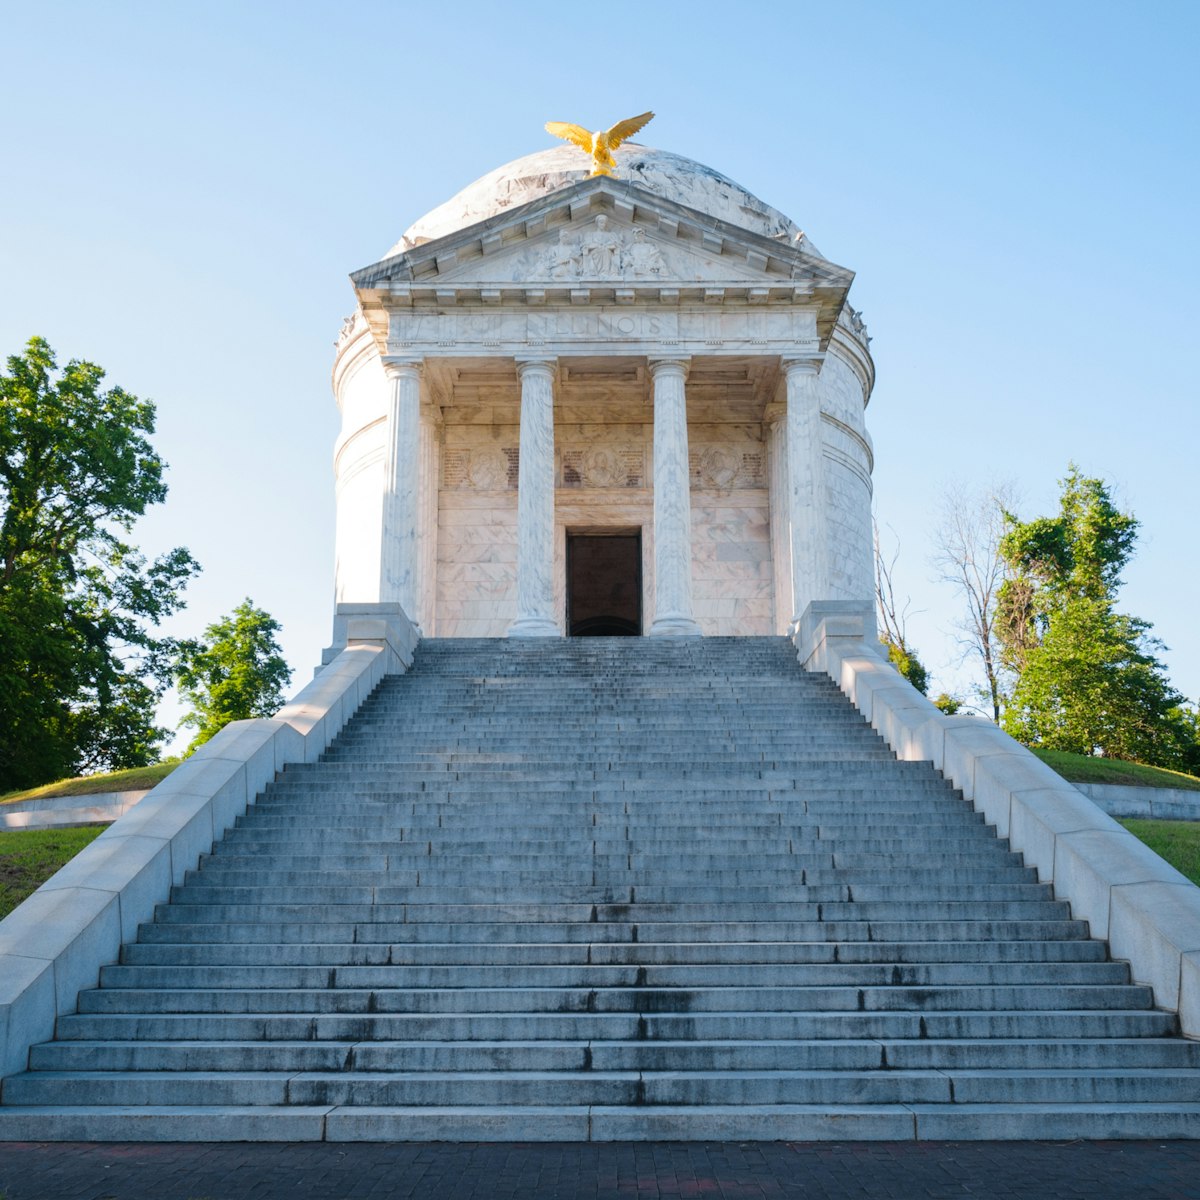 Vicksburg National Military Park; Shutterstock ID 305930666; Your name (First / Last): Lauren Keith; GL account no.: 65050; Netsuite department name: Content Asset; Full Product or Project name including edition: Guides Project Eastern USA